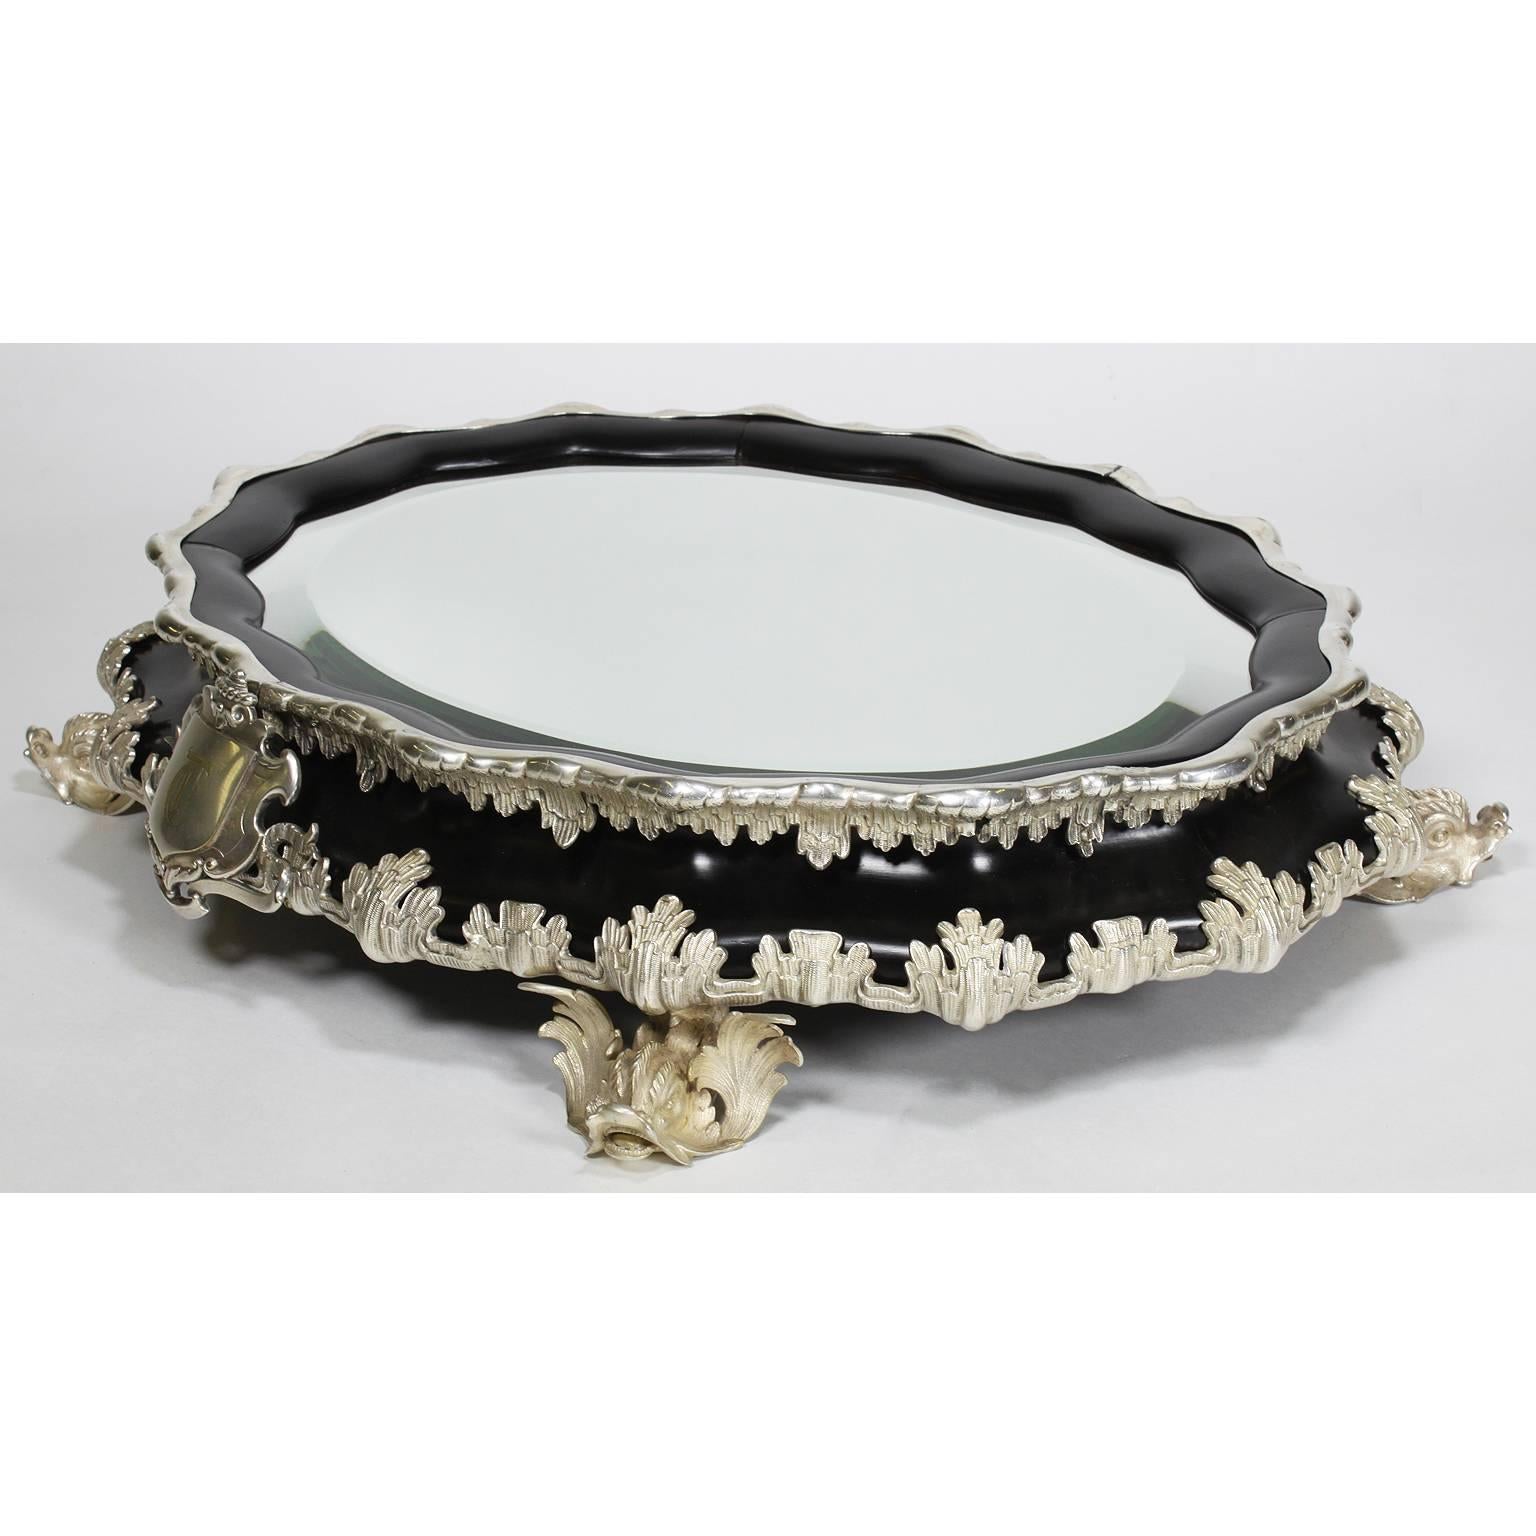 A French 19th-20th Century Ebonized Wood & Plated Surtout de Table Centerpiece For Sale 1